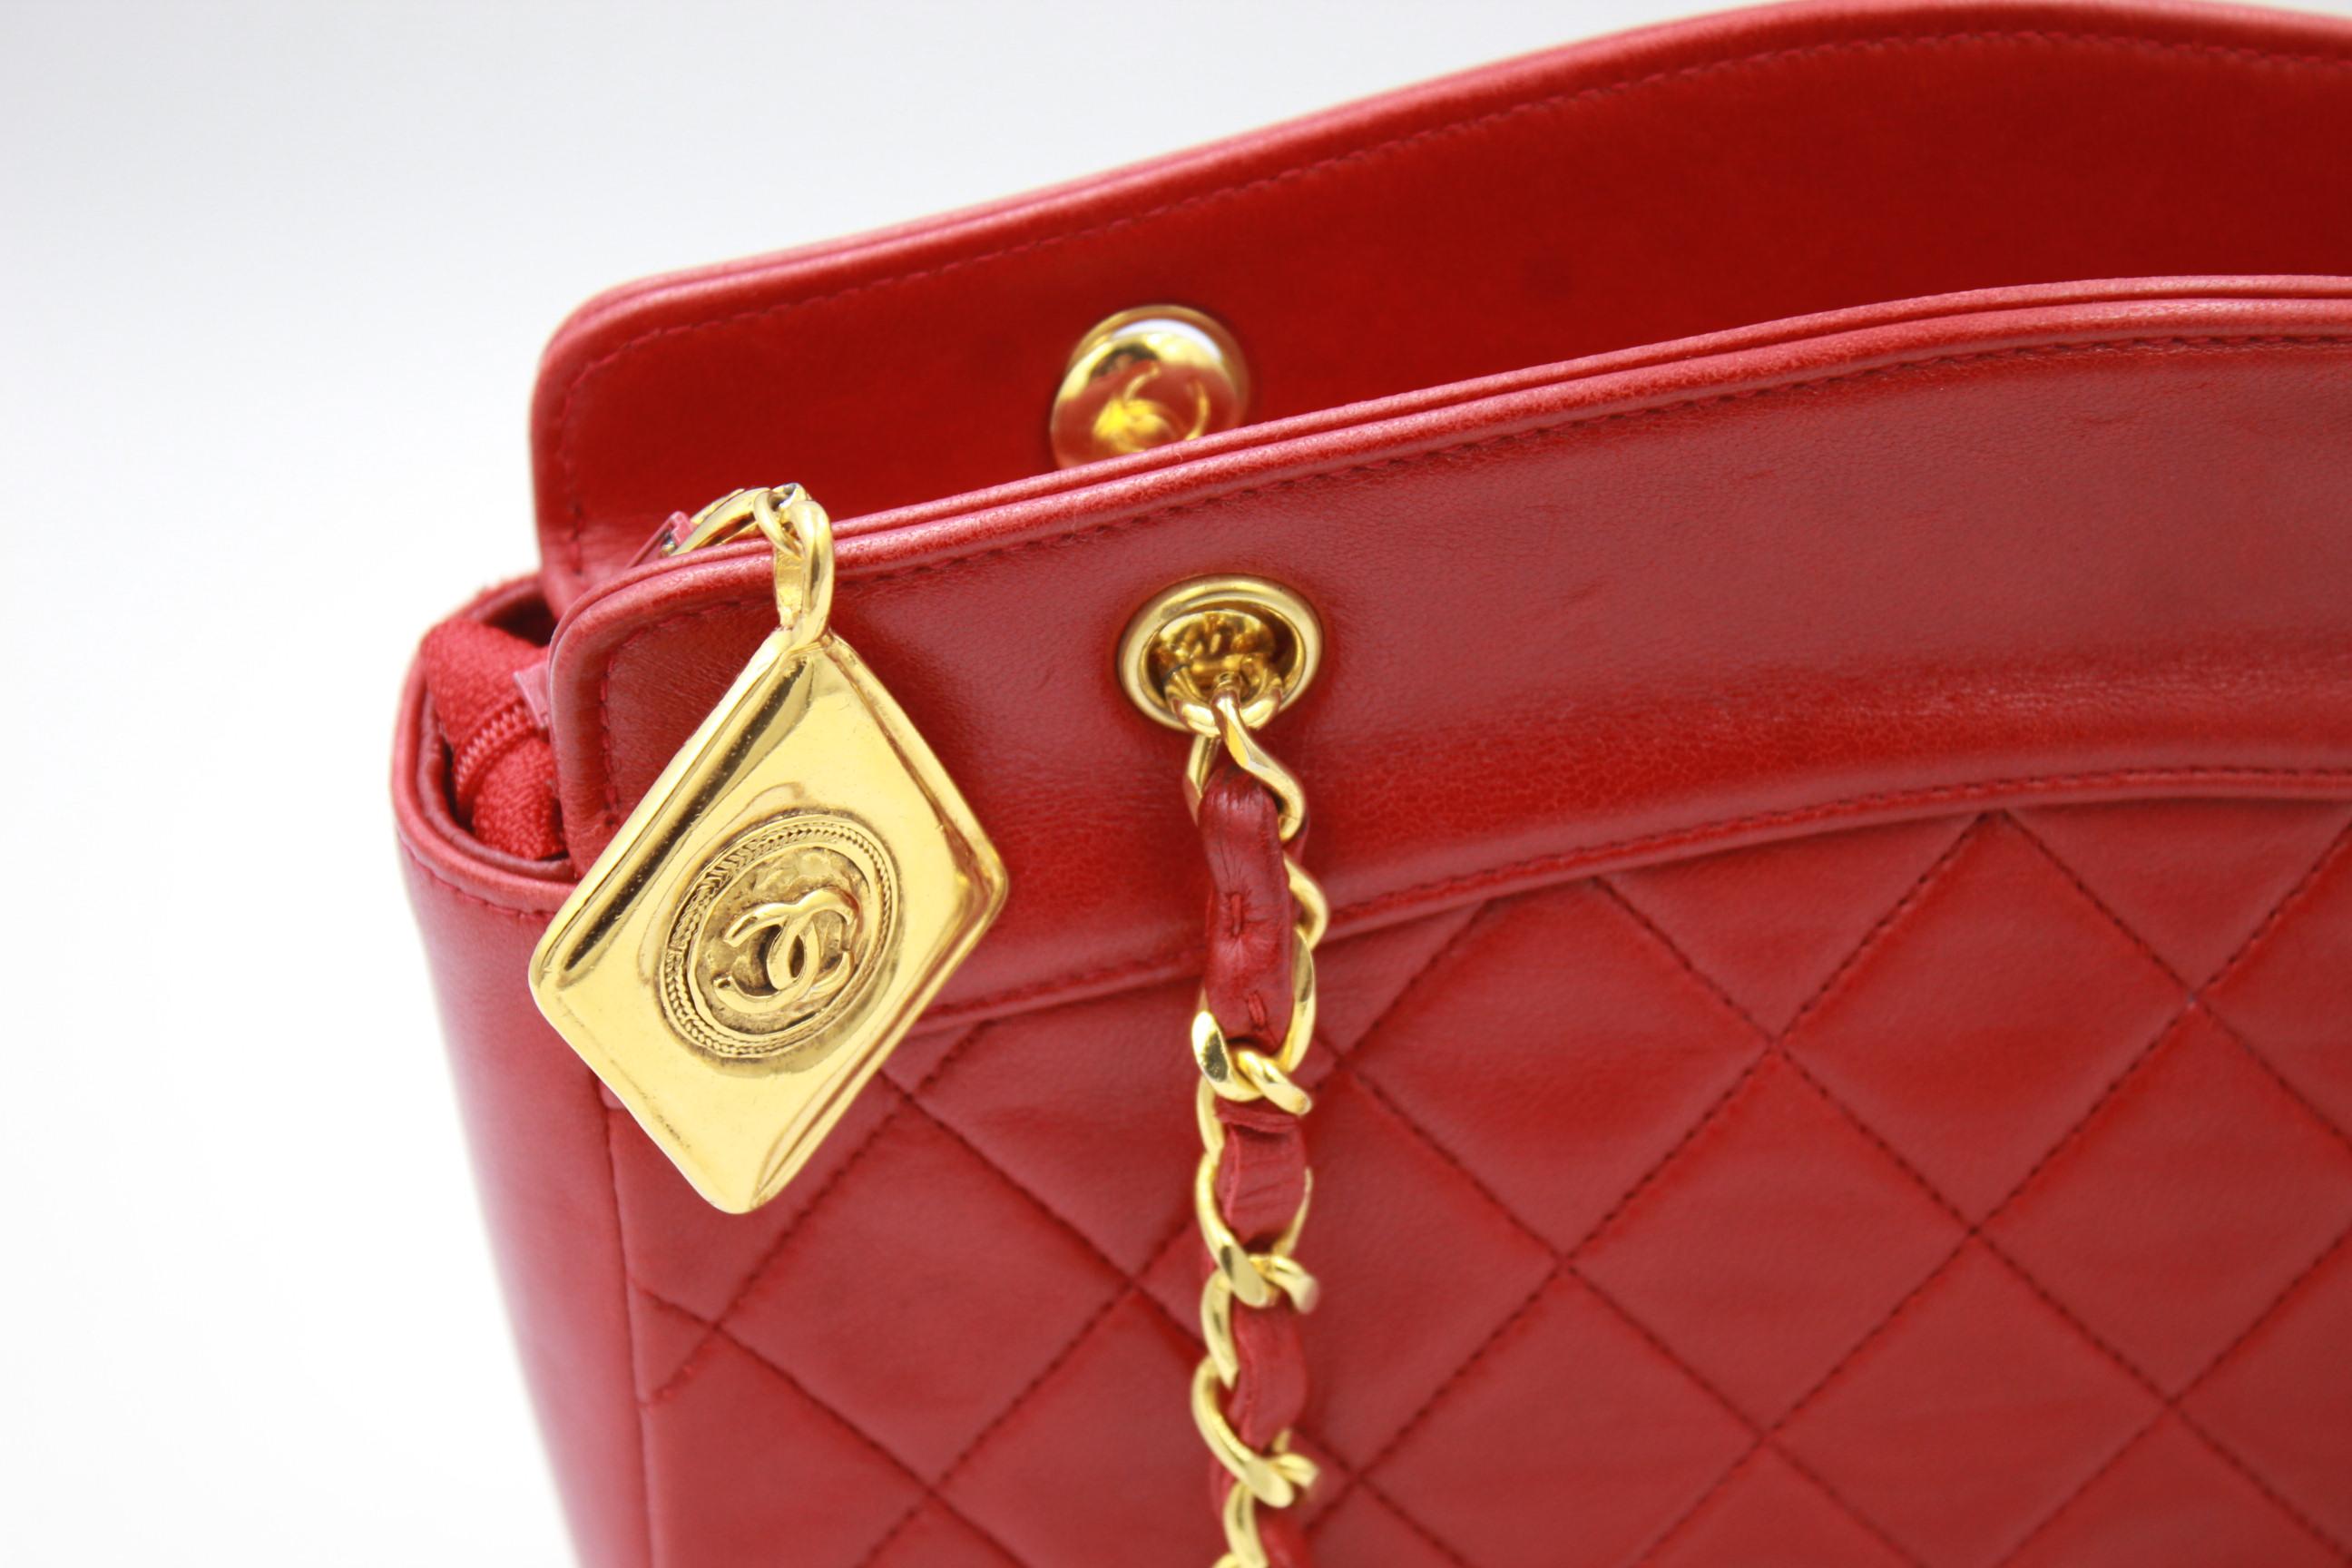 Really Lovely and hard to find vintage red lambskin leather Chanel bag.
Really excellent vintage condition, no major sign of use.
Card and hologram
Shiny golden chain
Mini Size 21*14.5